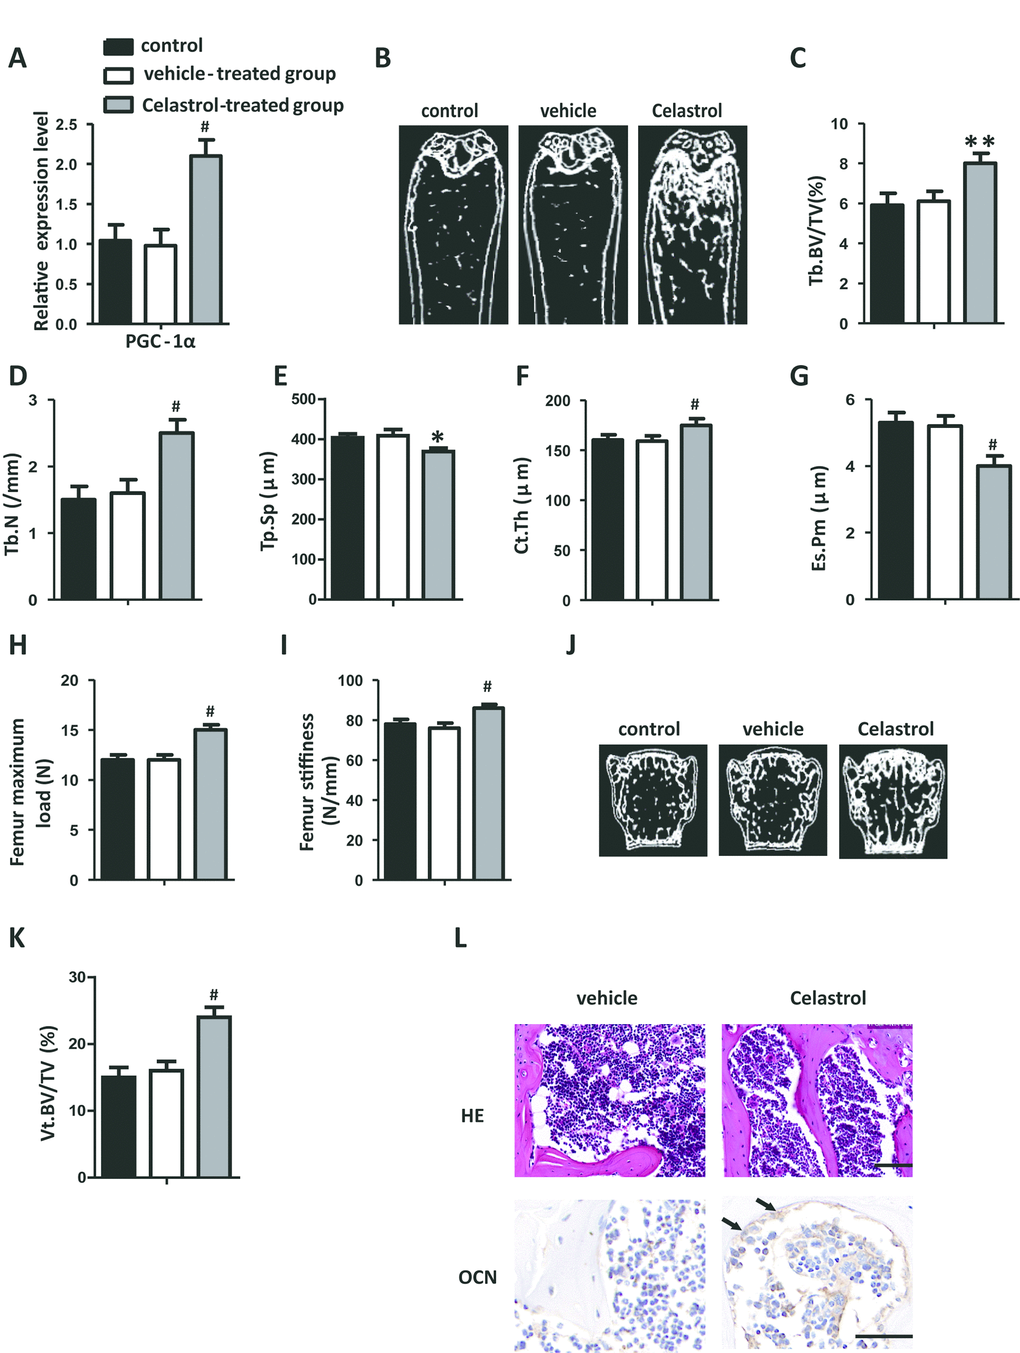 Celastrol treatment increased bone formation and reduced bone marrow fat in OVX mice. (A) mRNA expression level of PGC-1α in the BM-MSCs determined using qRT-PCR (n = 3 per group). (B–G) Representative μCT images (B) and quantitative μCT analysis of trabecular (C–E) and cortical (F, G) bone microarchitecture of the femora of Celastrol-treated mice. n = 6-7 per group. (H–I) Three-point bending measurement of femur maximum load (H) and stiffness (I). n = 5 per group. (J, K) Representative μCT images (J) and quantification of the ratio of bone volume to tissue volume (K) of L4 vertebrae (Vt. BV/TV). n = 6 per group. (L) Representative images of H&E staining (L, top) and osteocalcin immunohistochemical staining (L, bottom). Scale bars: 100 μm. n = 5 per group. Data are presented as mean ± SD. Statistical significance was determined using analysis of variance (one-way ANOVA). #P **P *P 